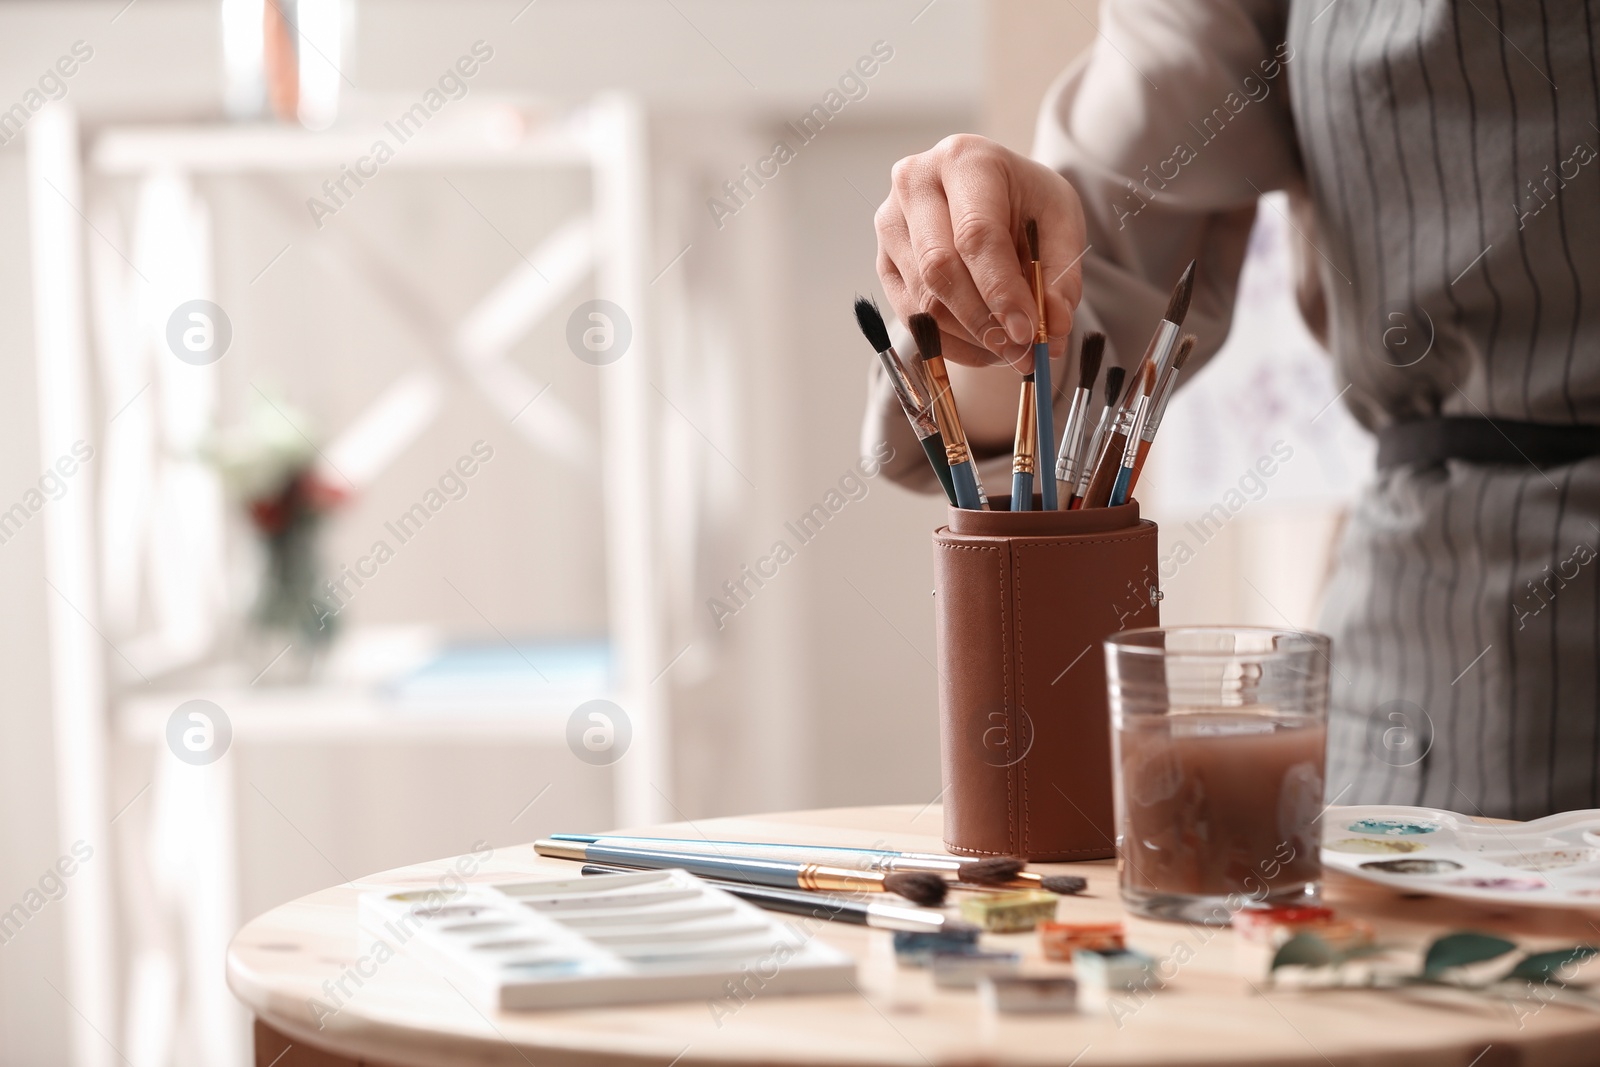 Photo of Watercolorist taking brush from holder on table in workshop, closeup